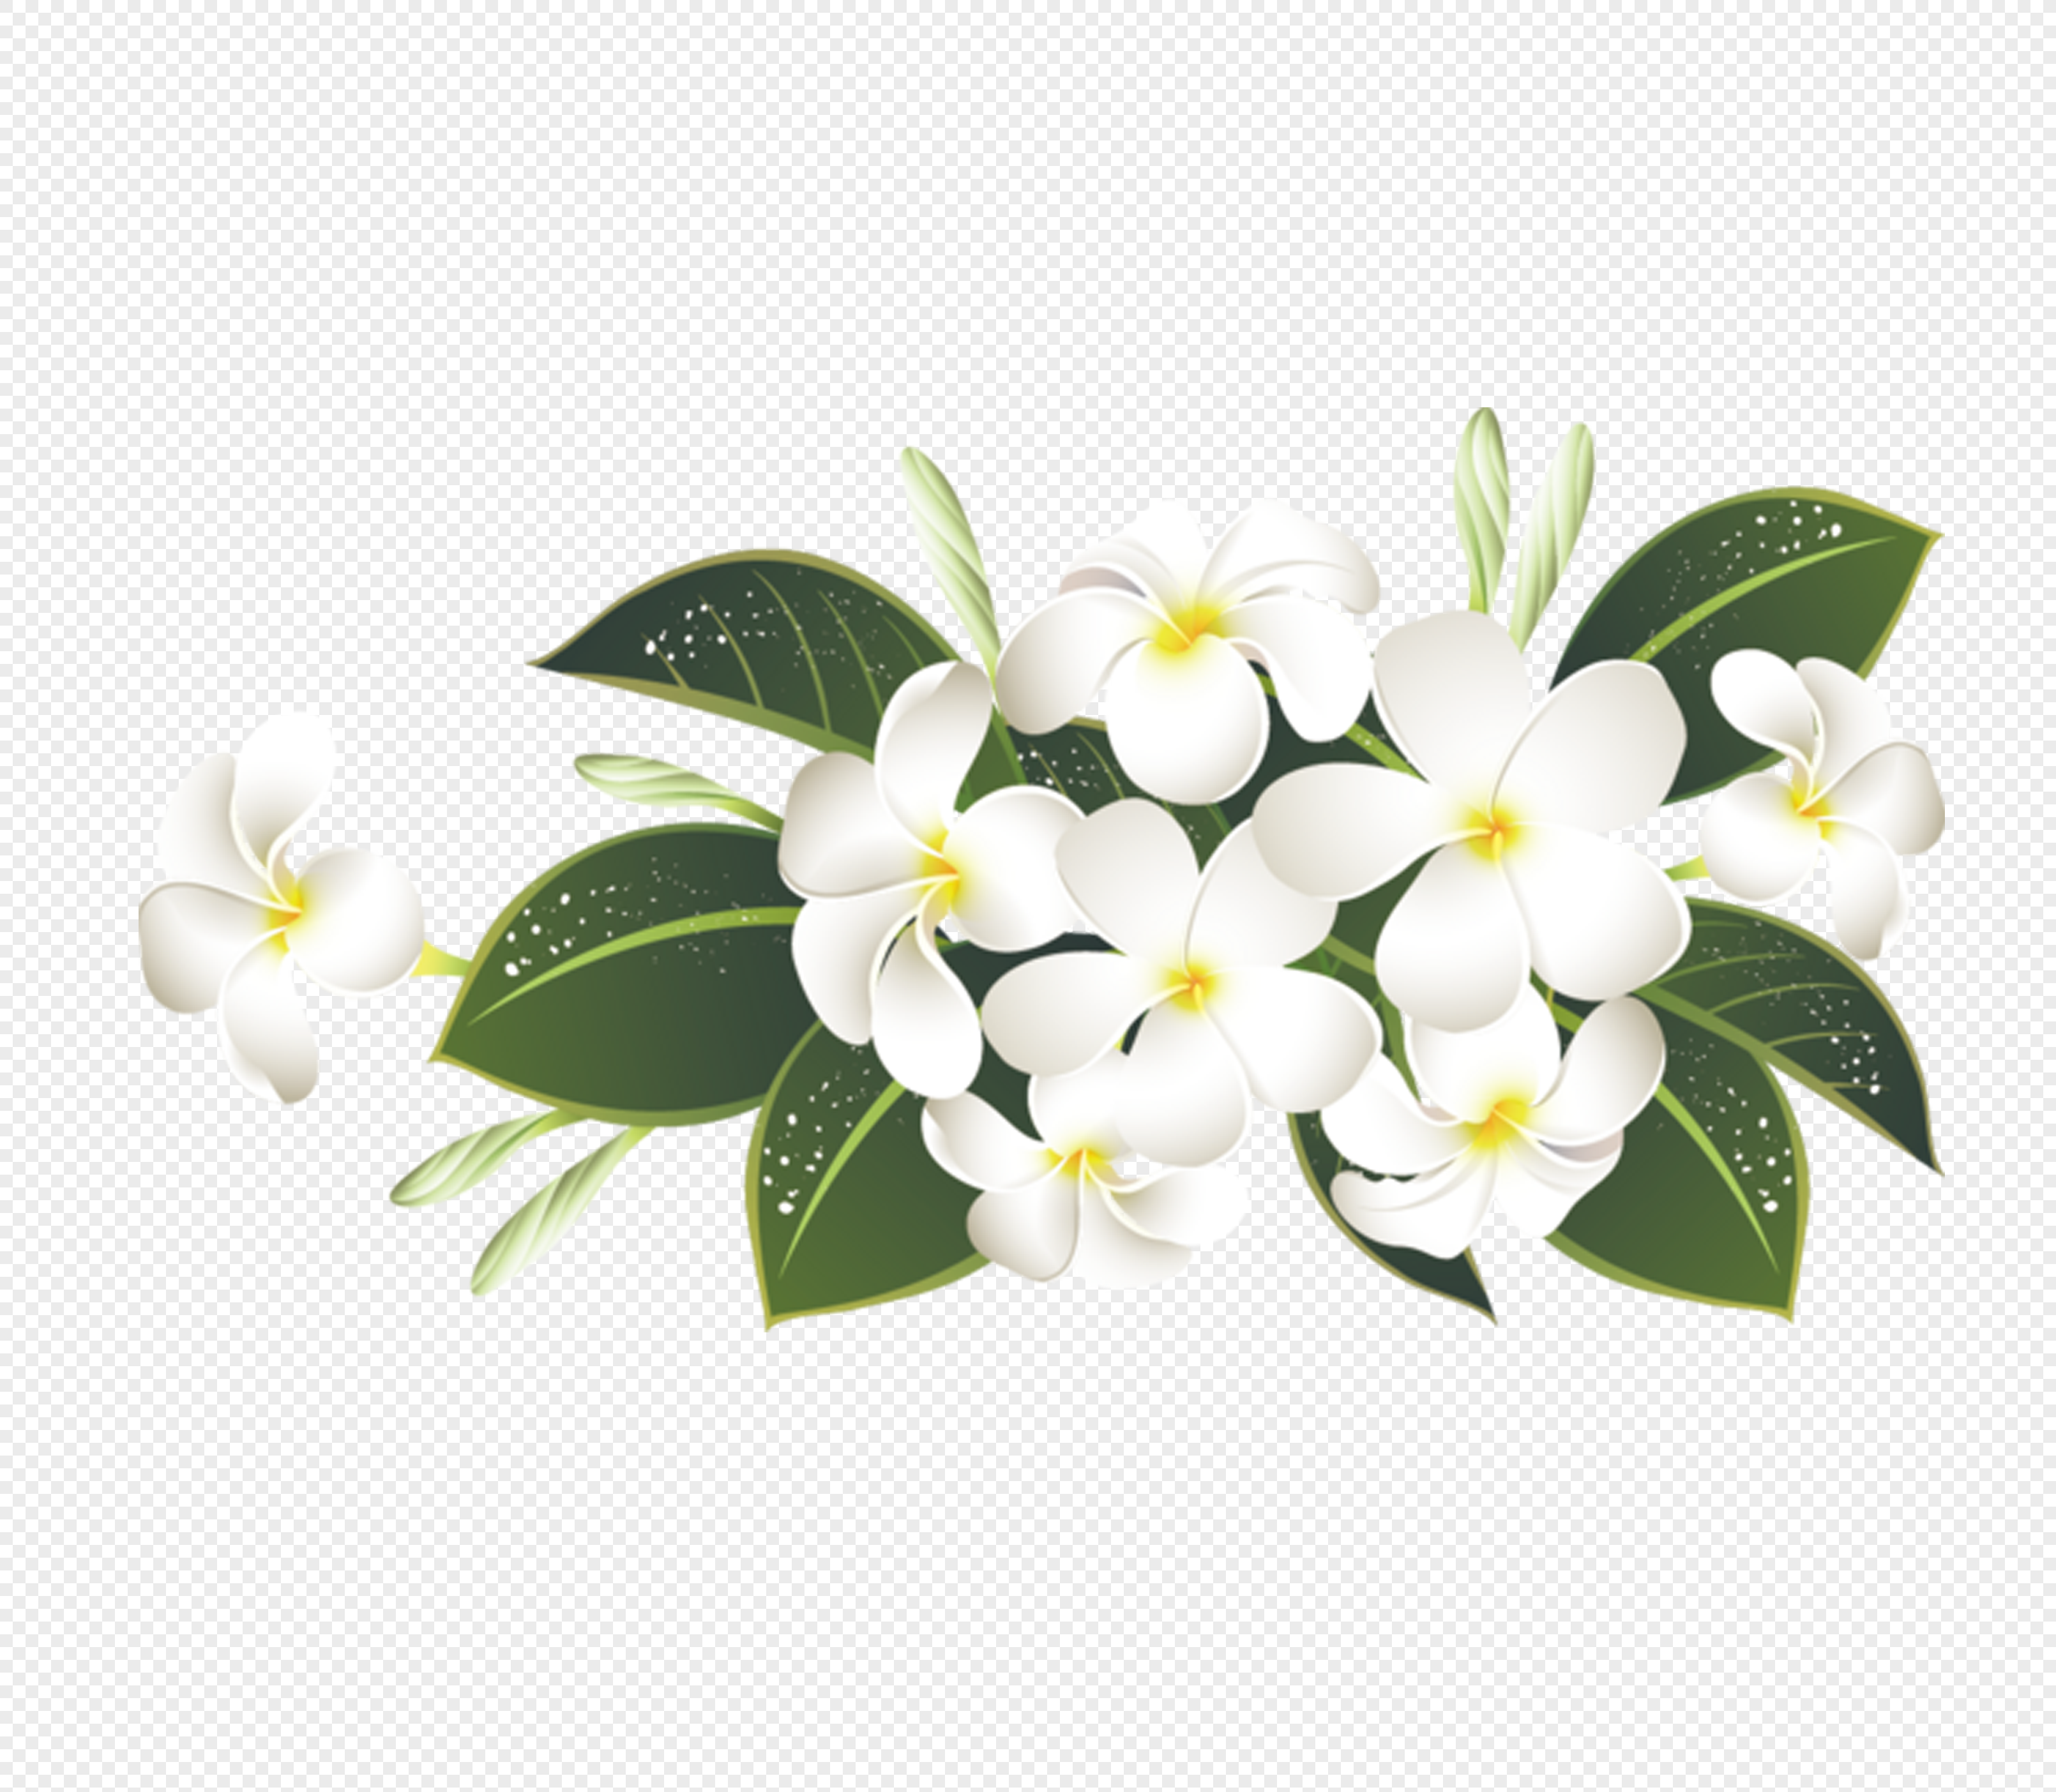 Beautiful jasmine flower png image_picture free download ...